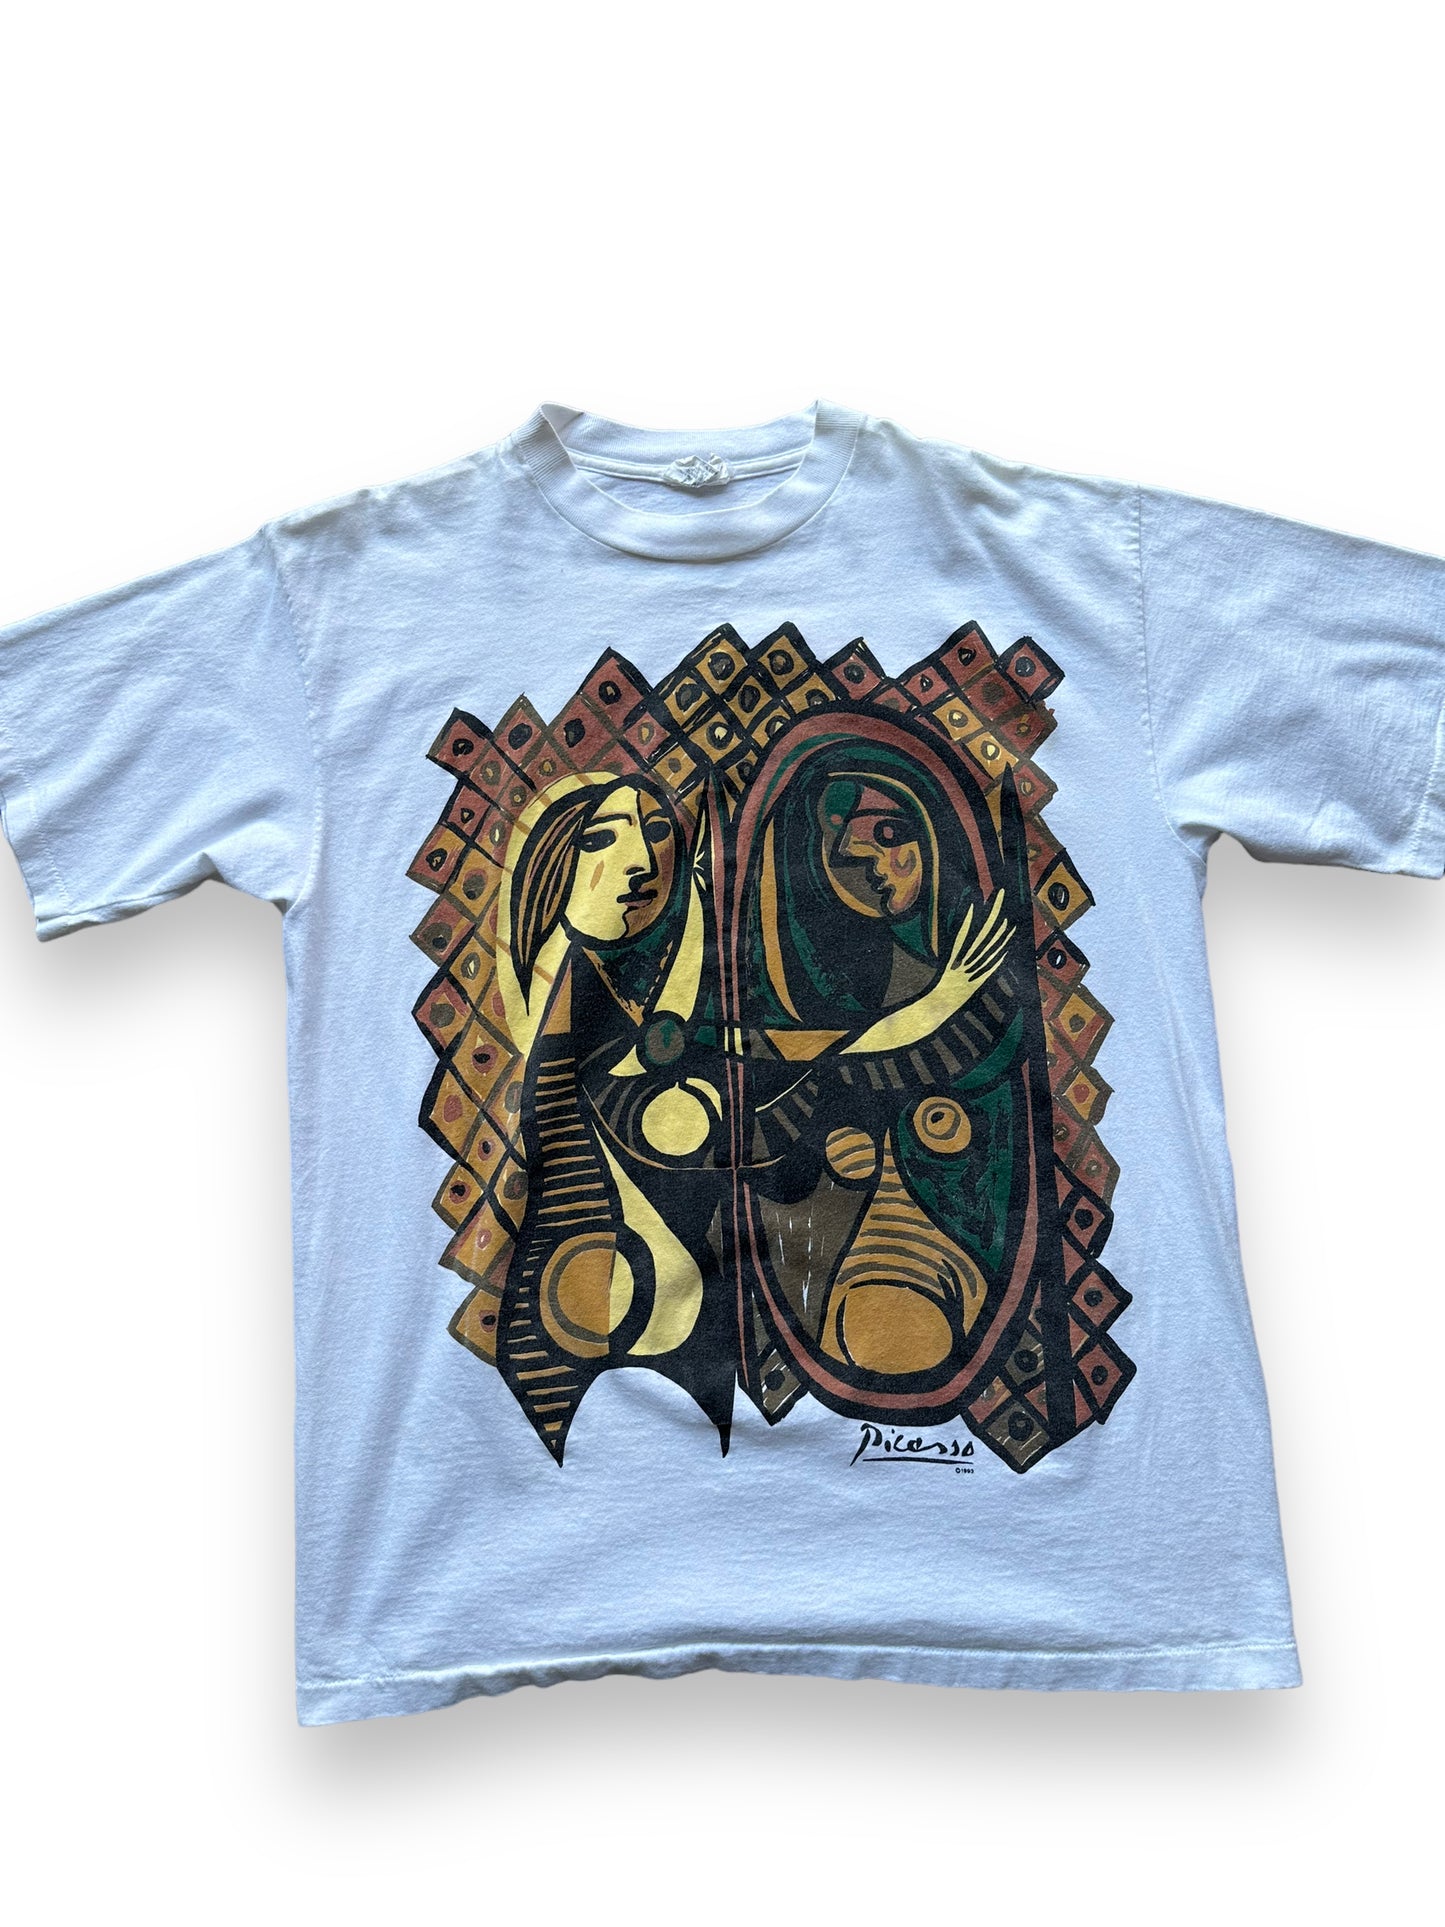 Front close up of Vintage Pablo Picasso Tee SZ XL |  Vintage Art Tee Seattle | Barn Owl Vintage